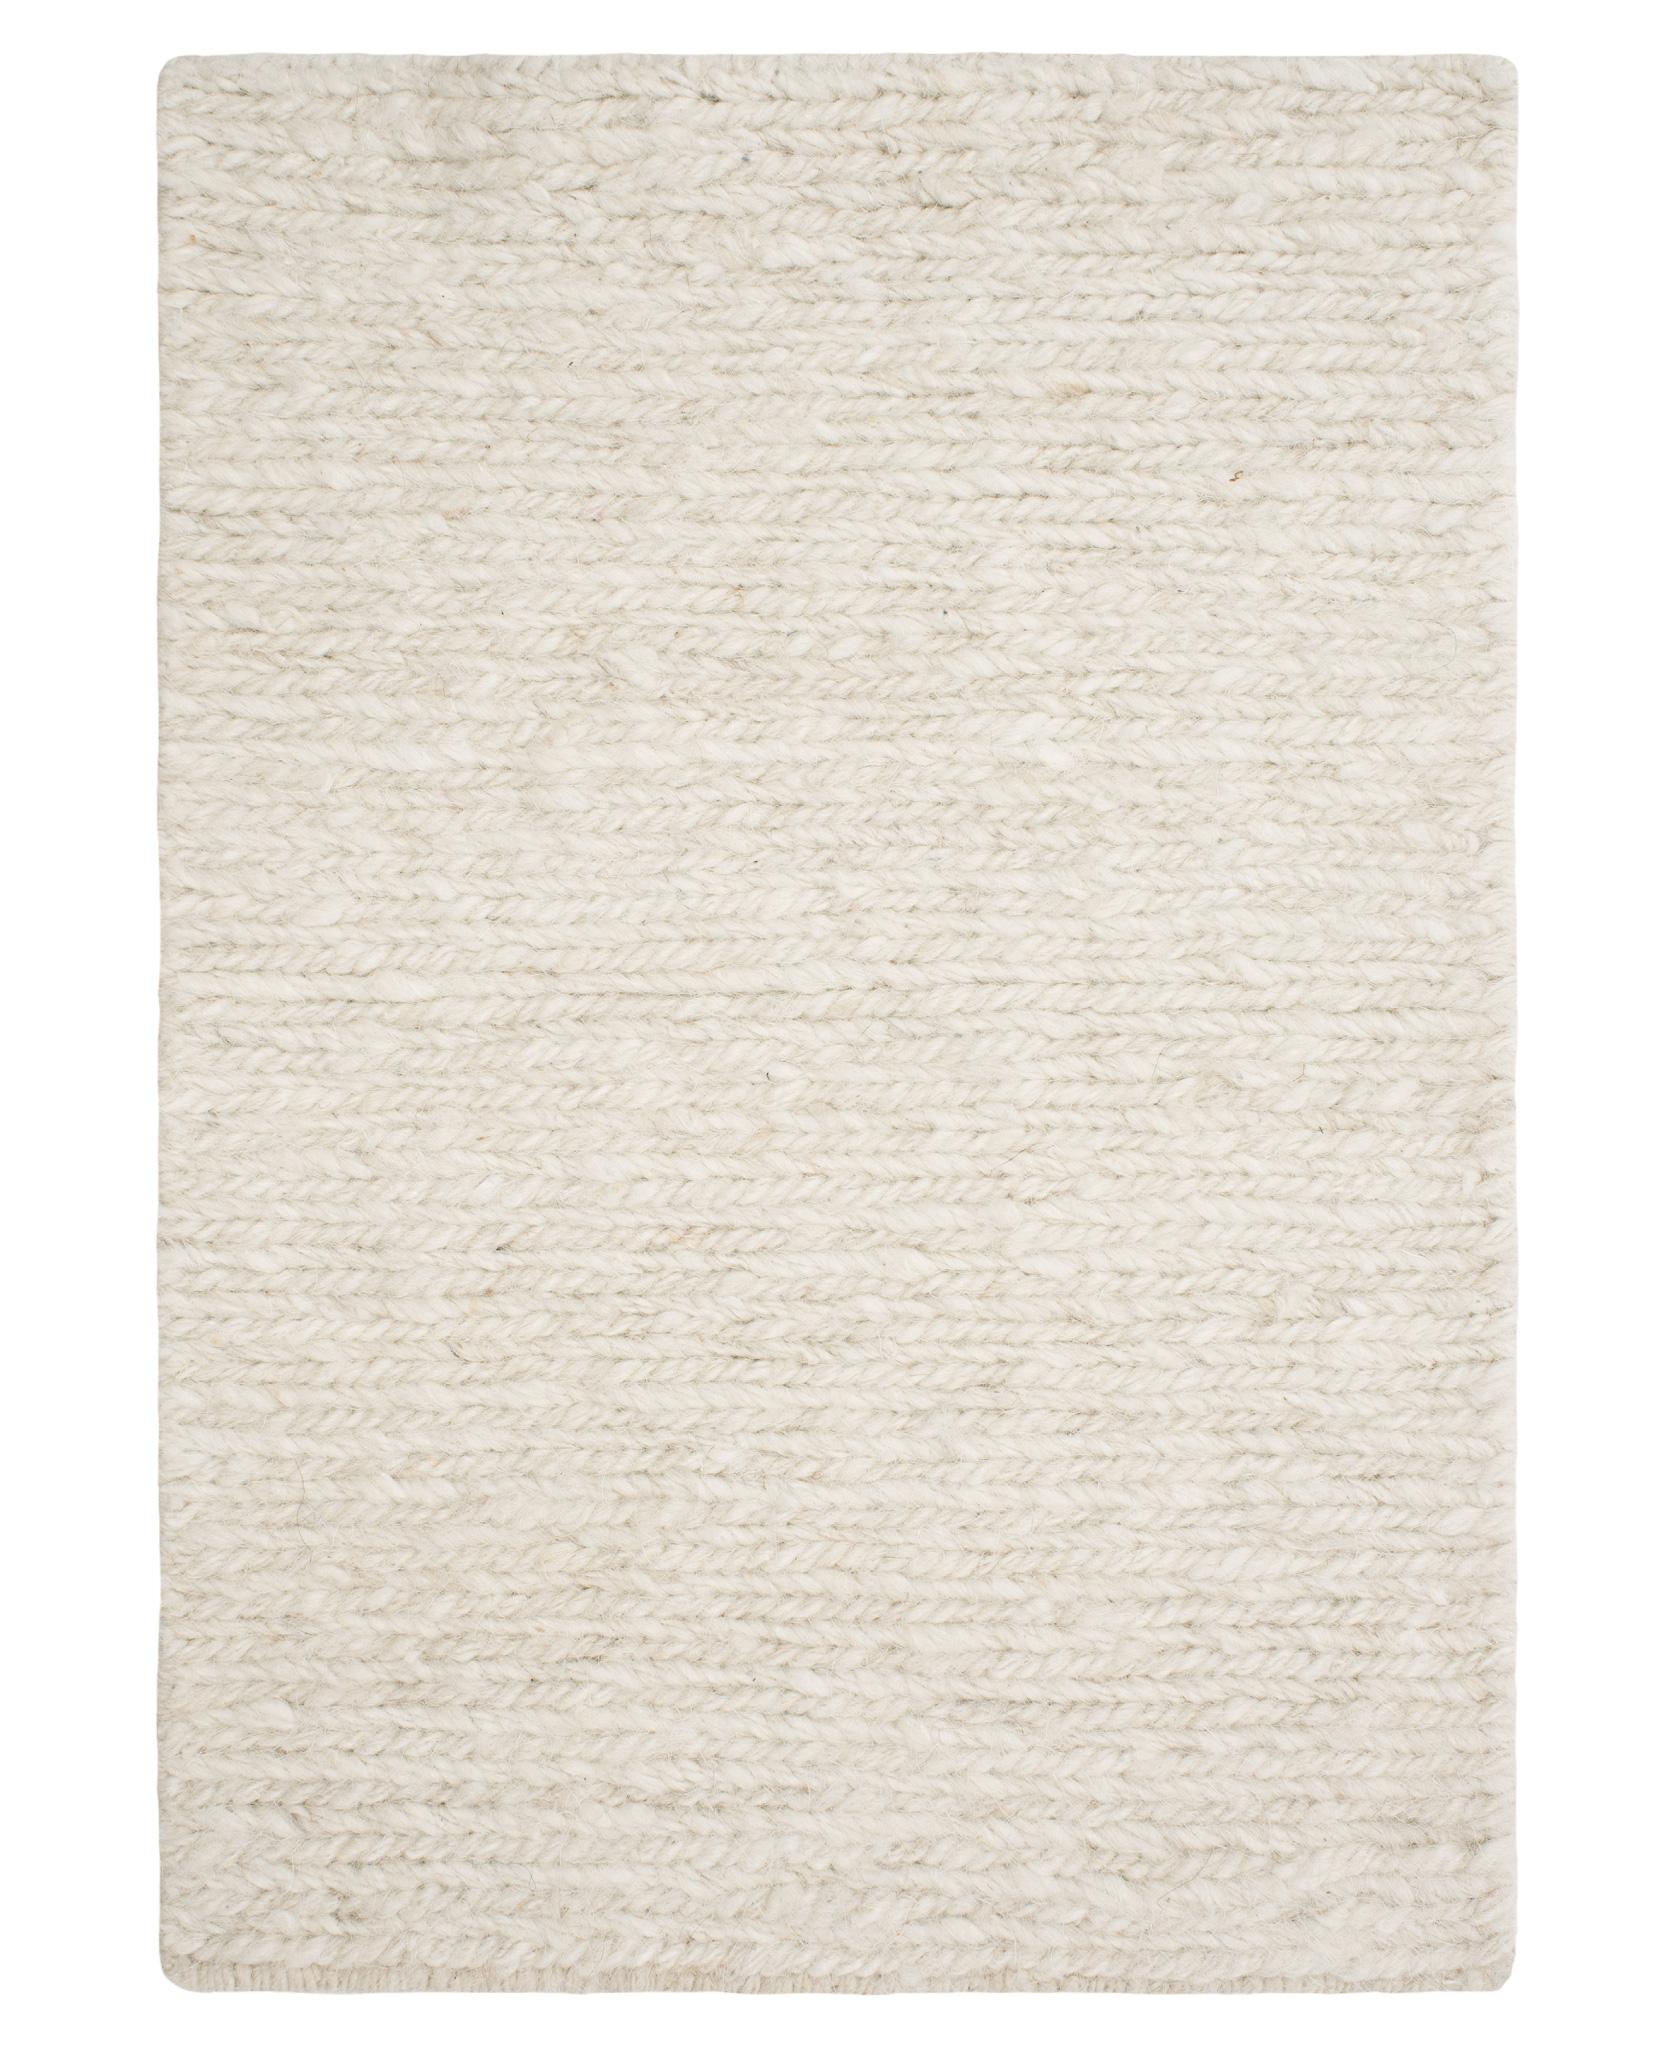 COLOUR: Plain Cream
MATERIAL: 100% Un-dyed wool
QUALITY: Sumac flatweave
ORIGIN: Hand-Woven rug produced in Nepal
 
RUG SIZE DISPLAYED: 200cm x 300cm

Part of the Knots Rugs Textures collection, Chunky Sumac is a handwoven sumac rug produced in